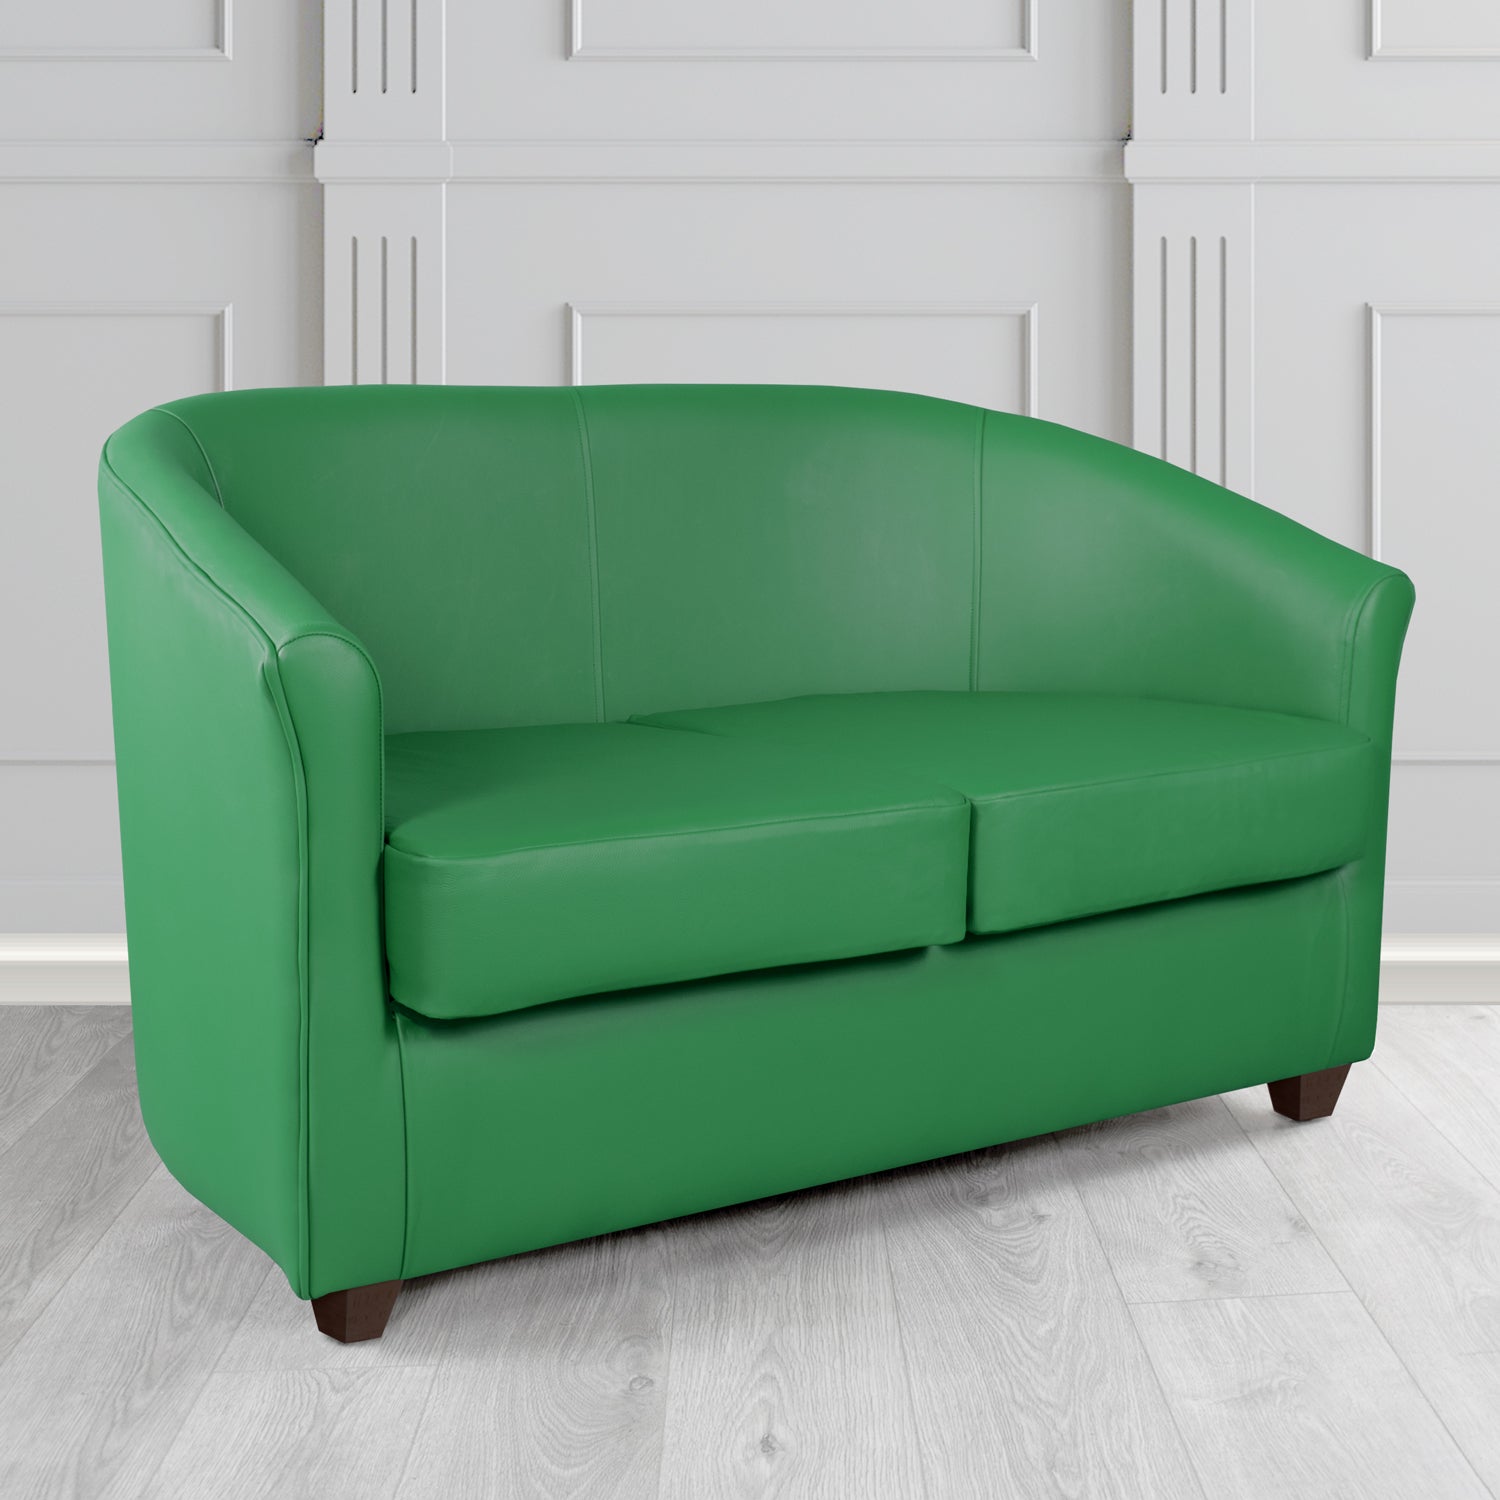 Cannes 2 Seater Tub Sofa in Just Colour Laurel Crib 5 Faux Leather - The Tub Chair Shop